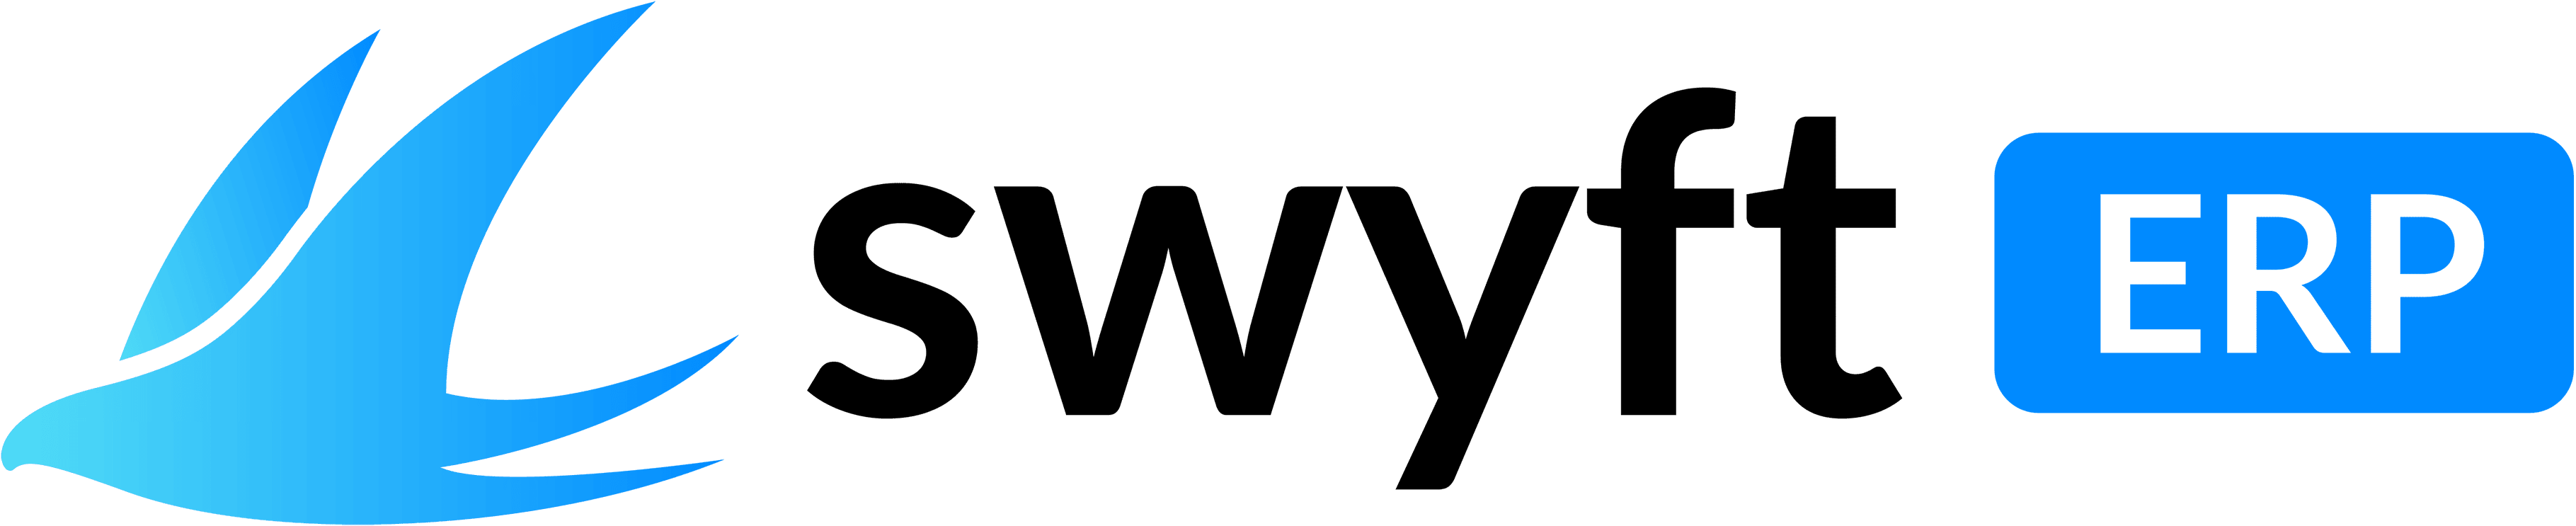 Swyft ERP – NetSuite Partners, Consultants & Developers